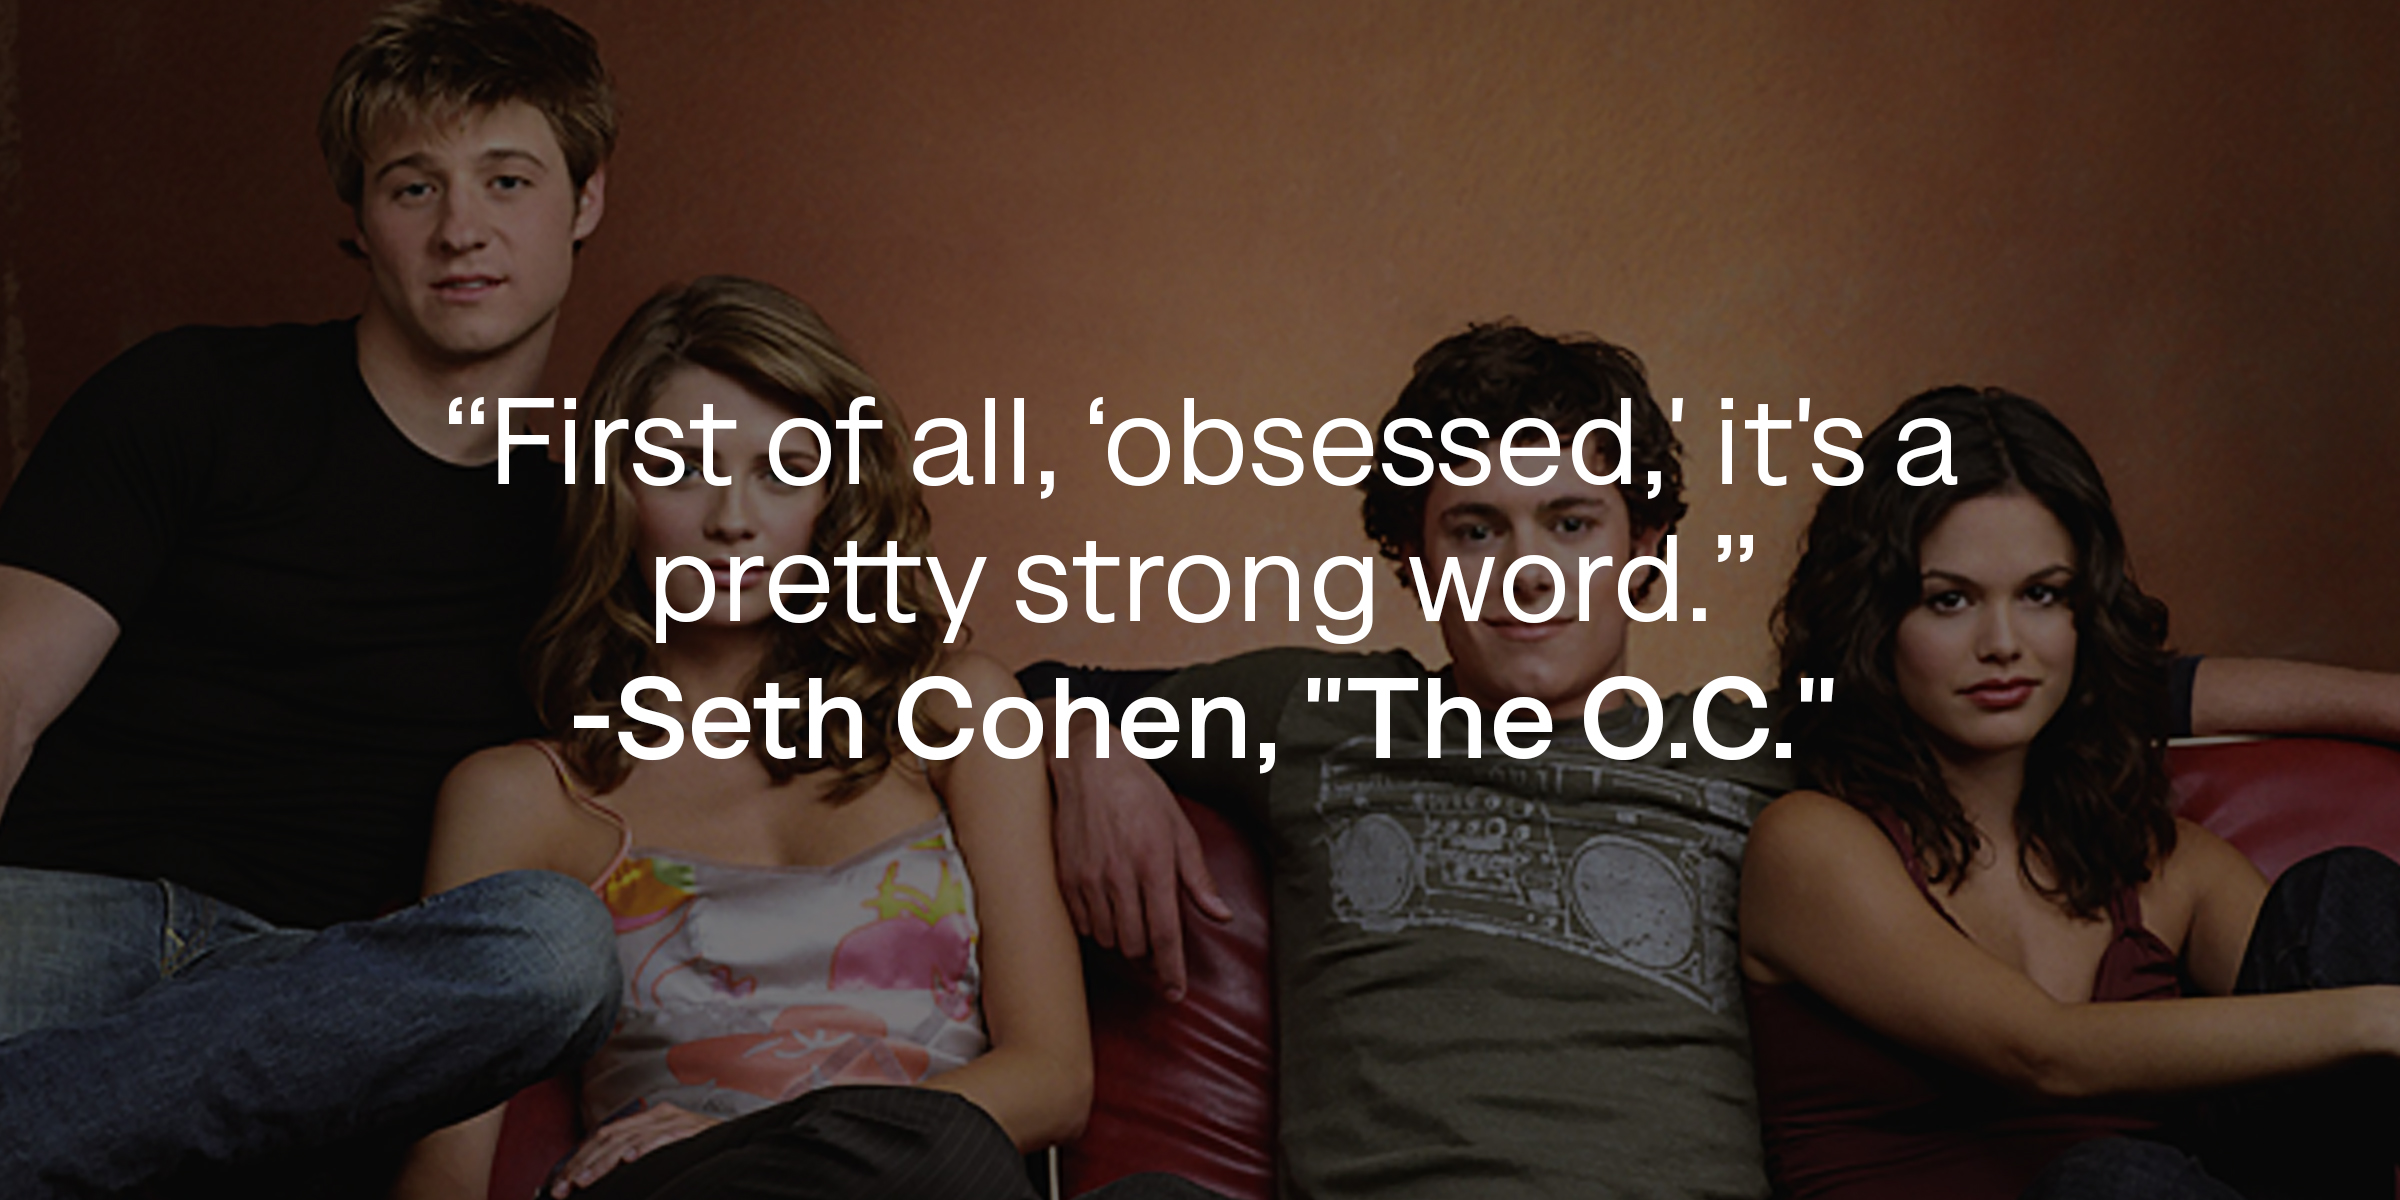 Seth Cohen's quote: "First of all, ‘obsessed,' it's a pretty strong word." | Source: Facebook.com/TheOC